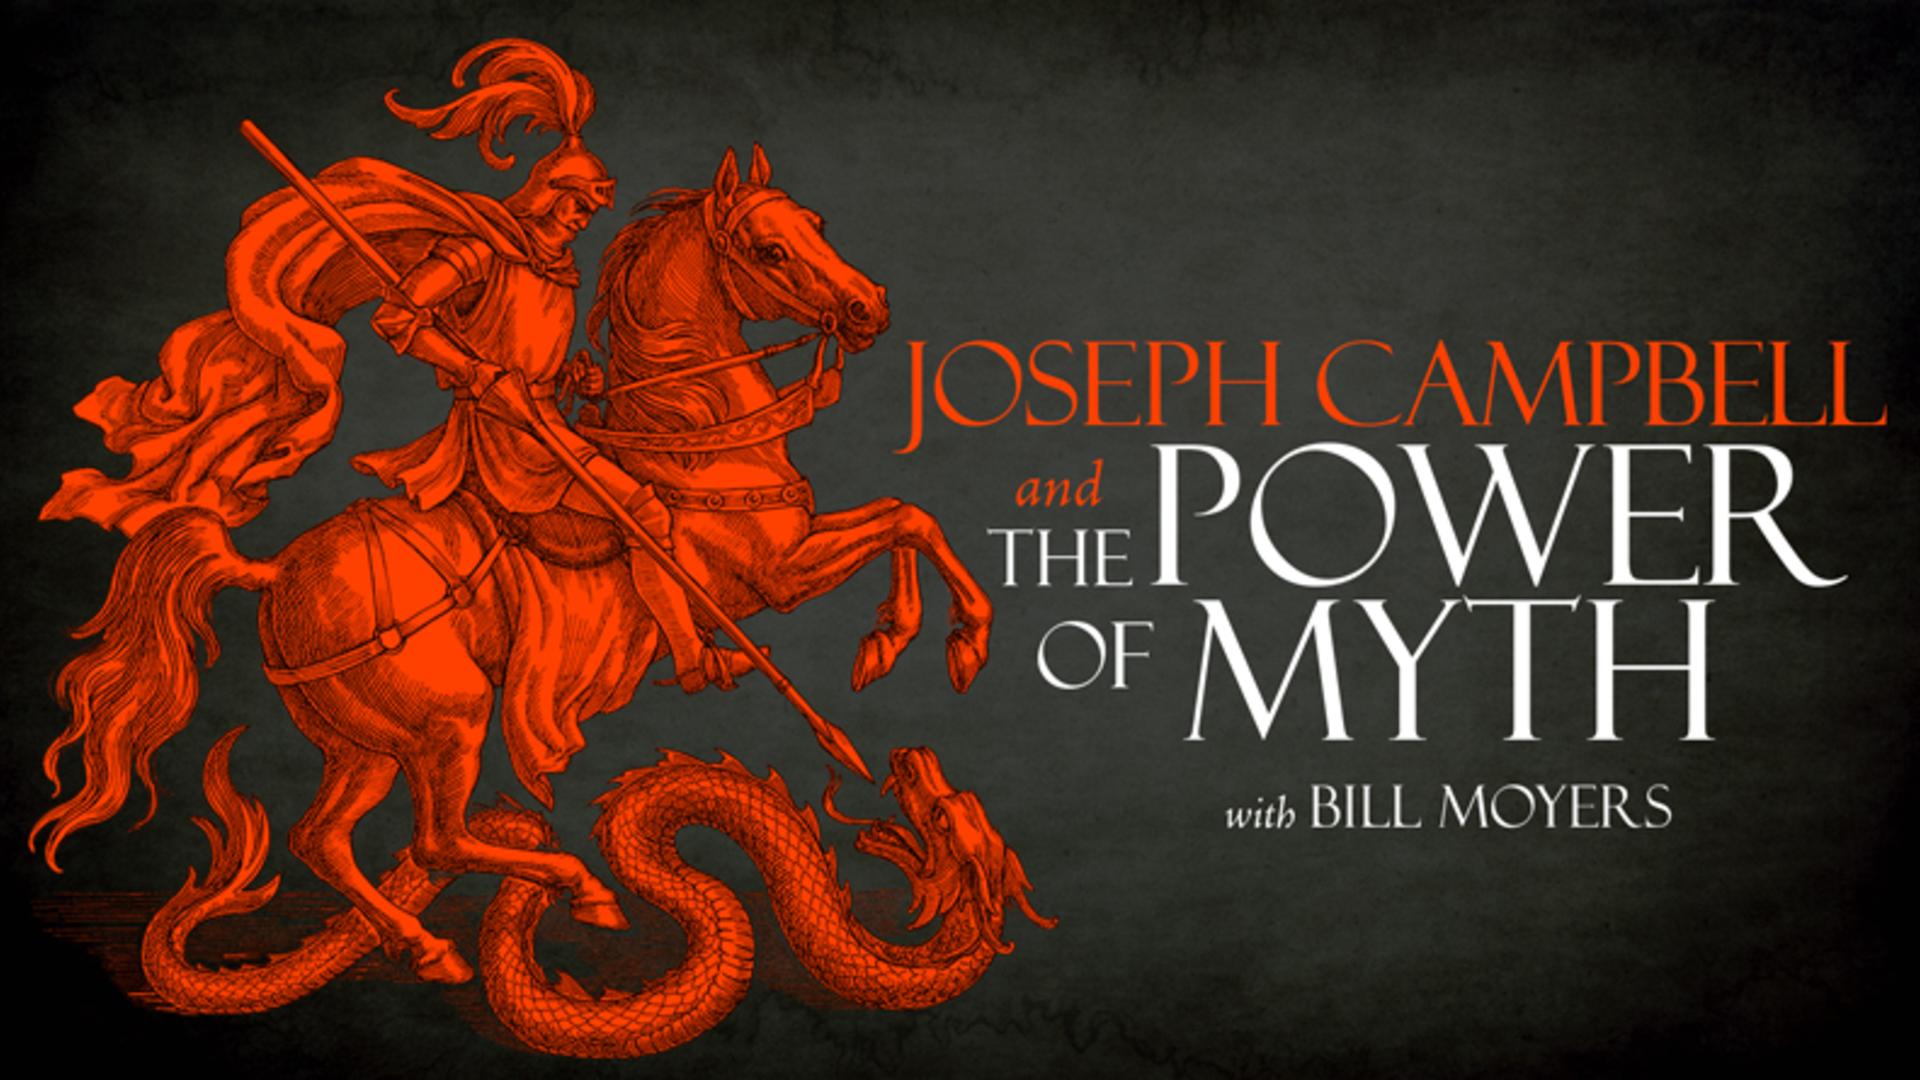 Joseph Campbell and the Power of Myth - Series of 6 Episodes